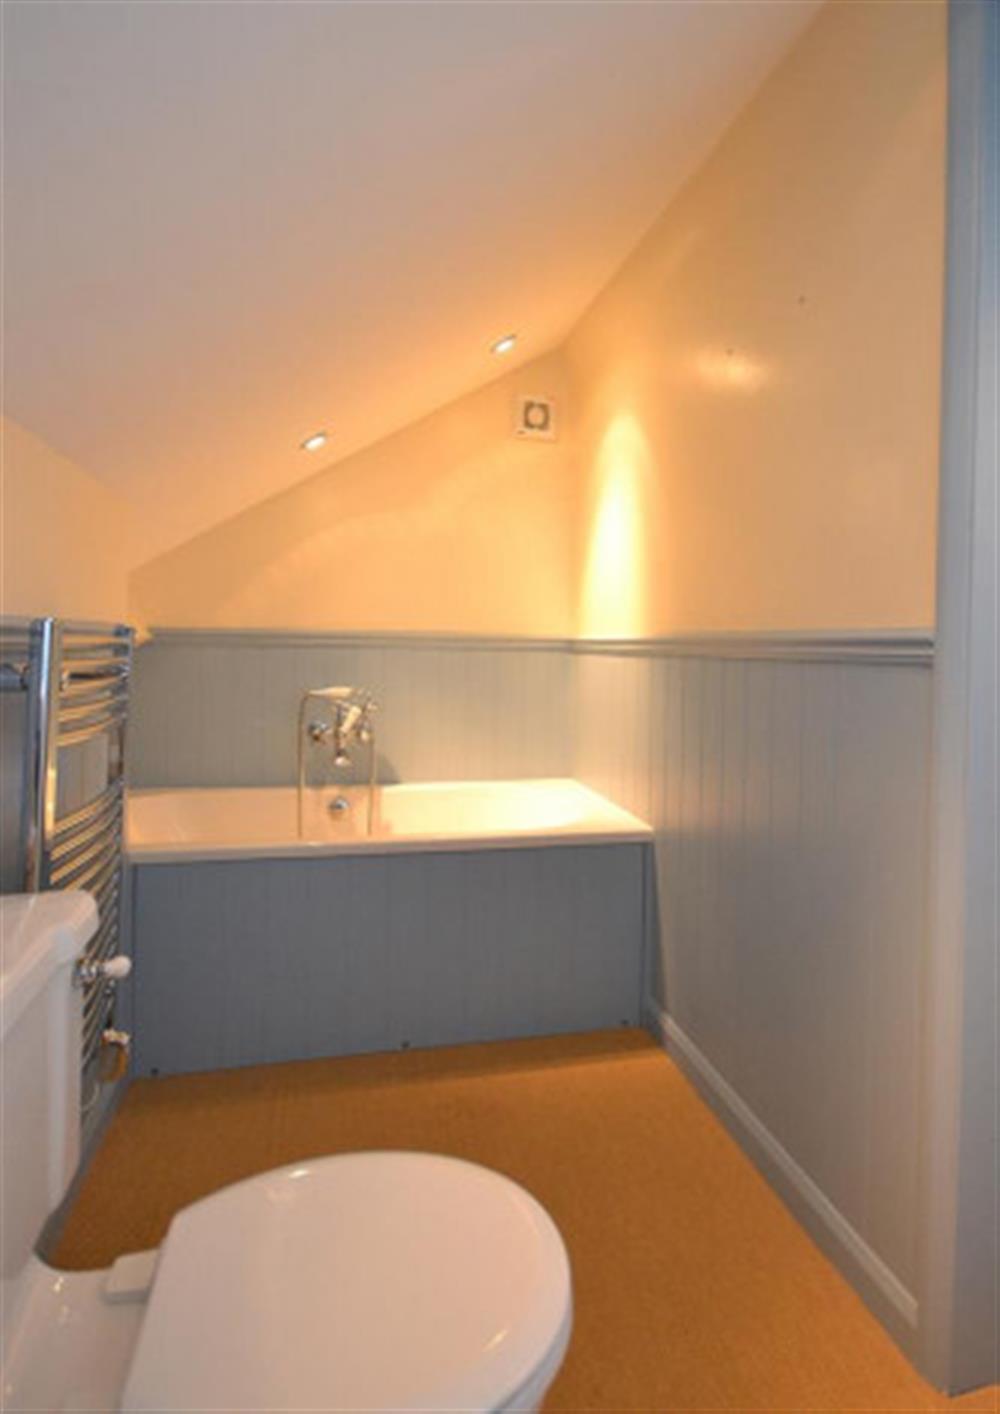 The first floor en suite at Thorpe Arnold Minor in Thurlestone